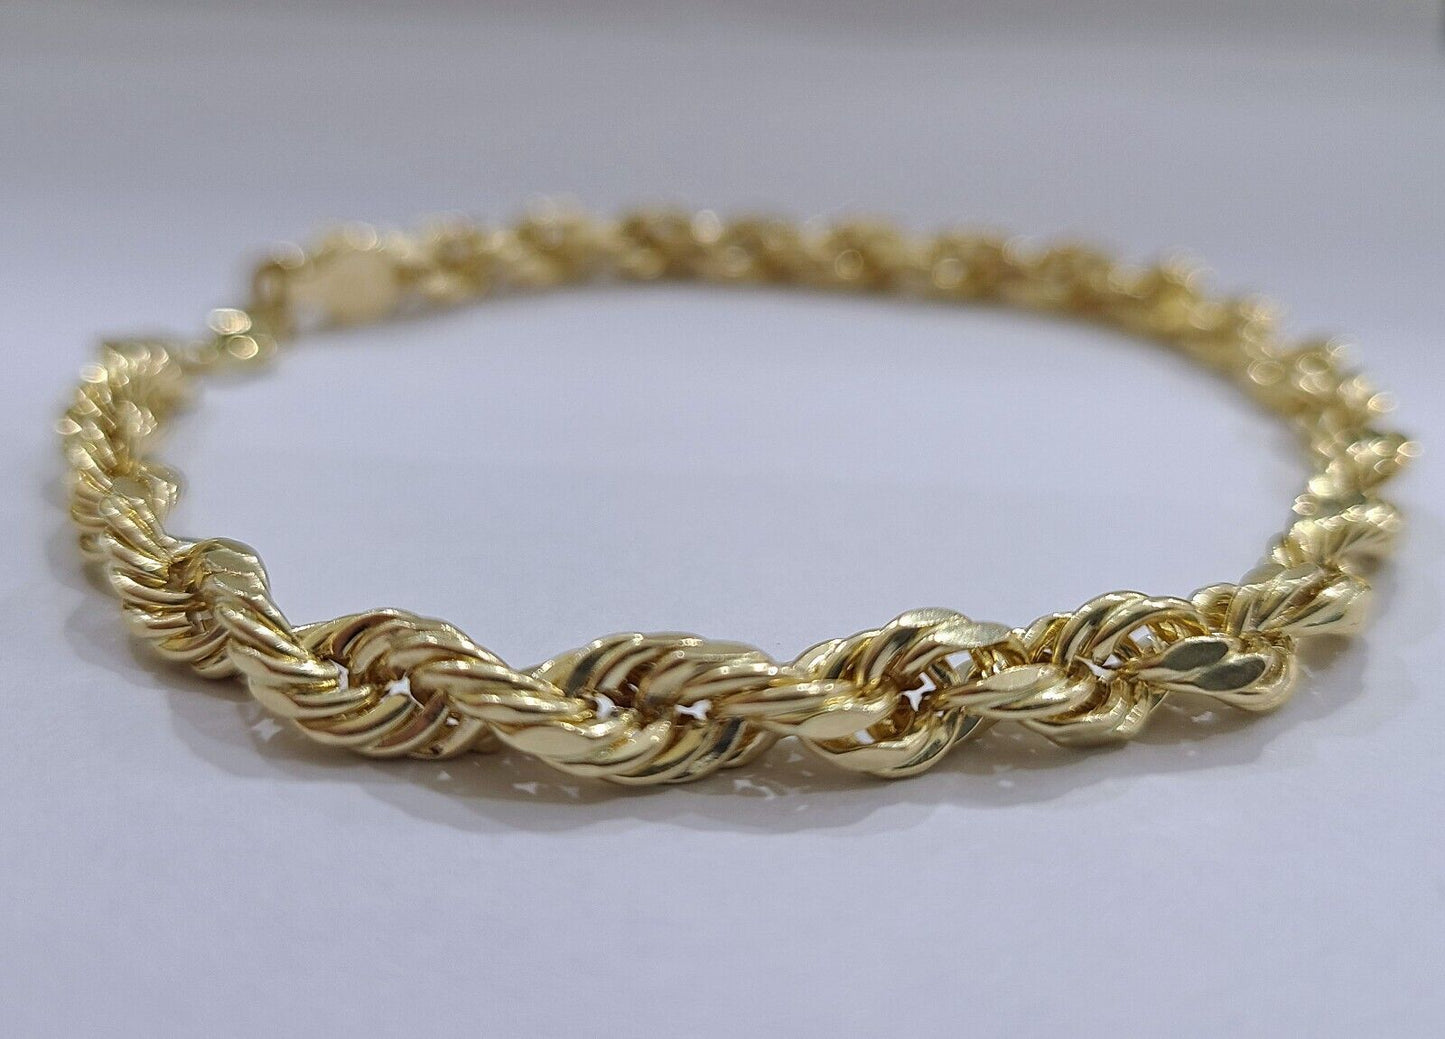 Real 10k Yellow Gold 5mm Rope Bracelet 9'' inch 10kt Unisex